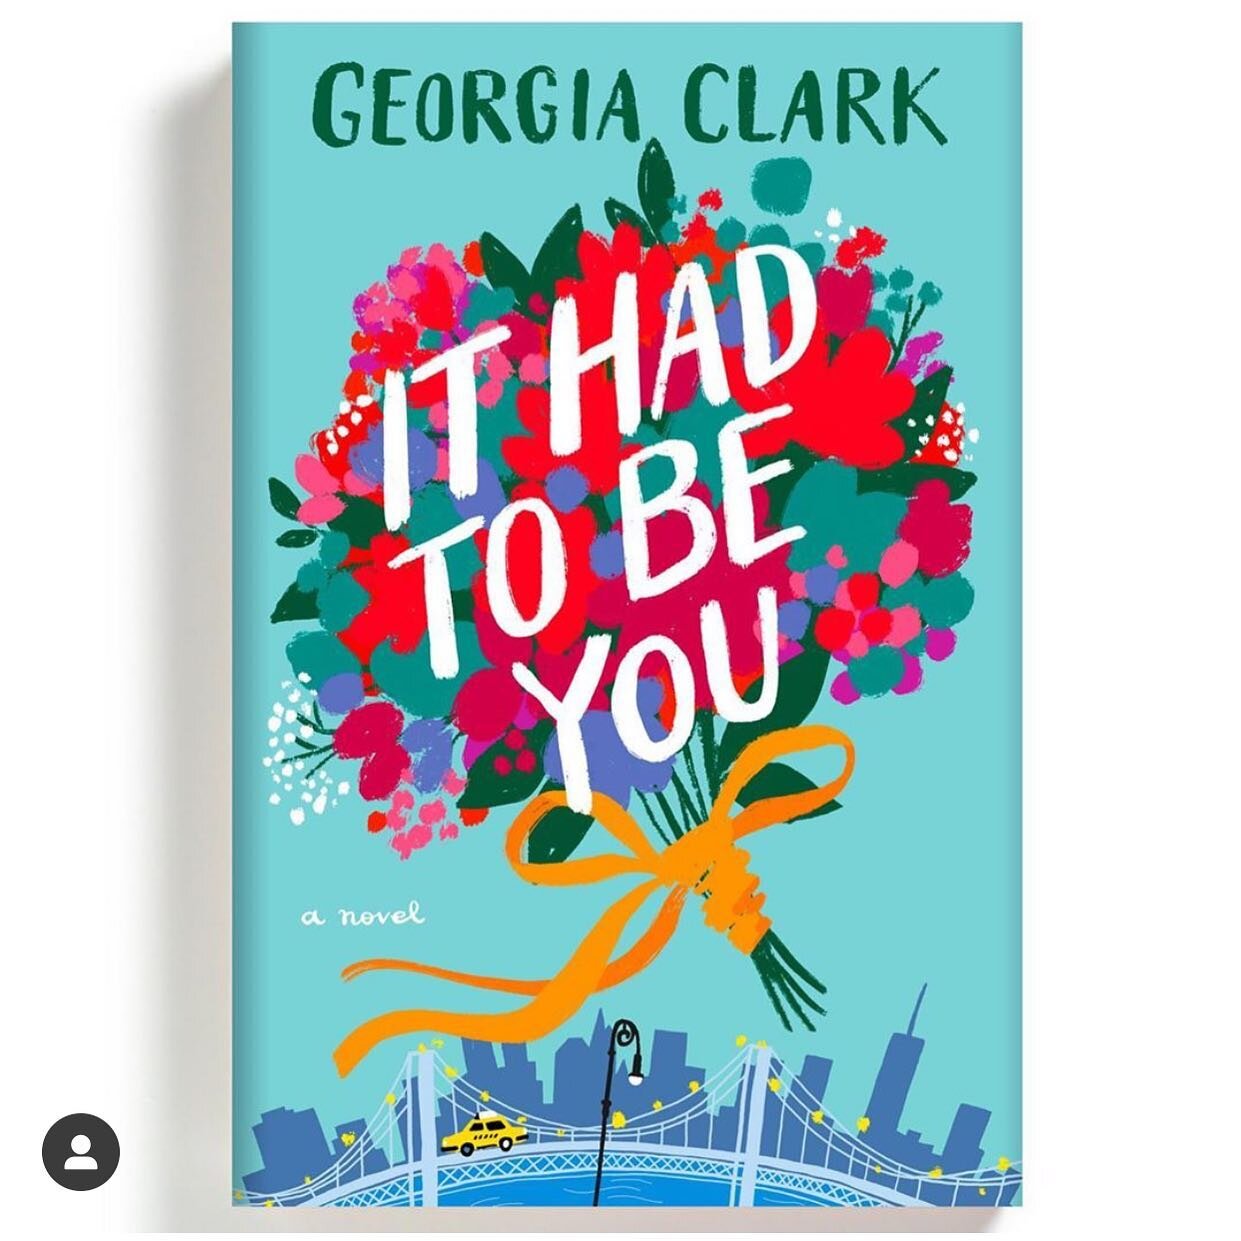 Everything is stressful and crappy right now, but two things are keeping me going 1. The Wife finally wrote a ROM COM (my favorite genre!). IT HAD TO BE YOU out May 2021. An absolute delight and her best work yet. Spoiler alert - it&rsquo;s not about